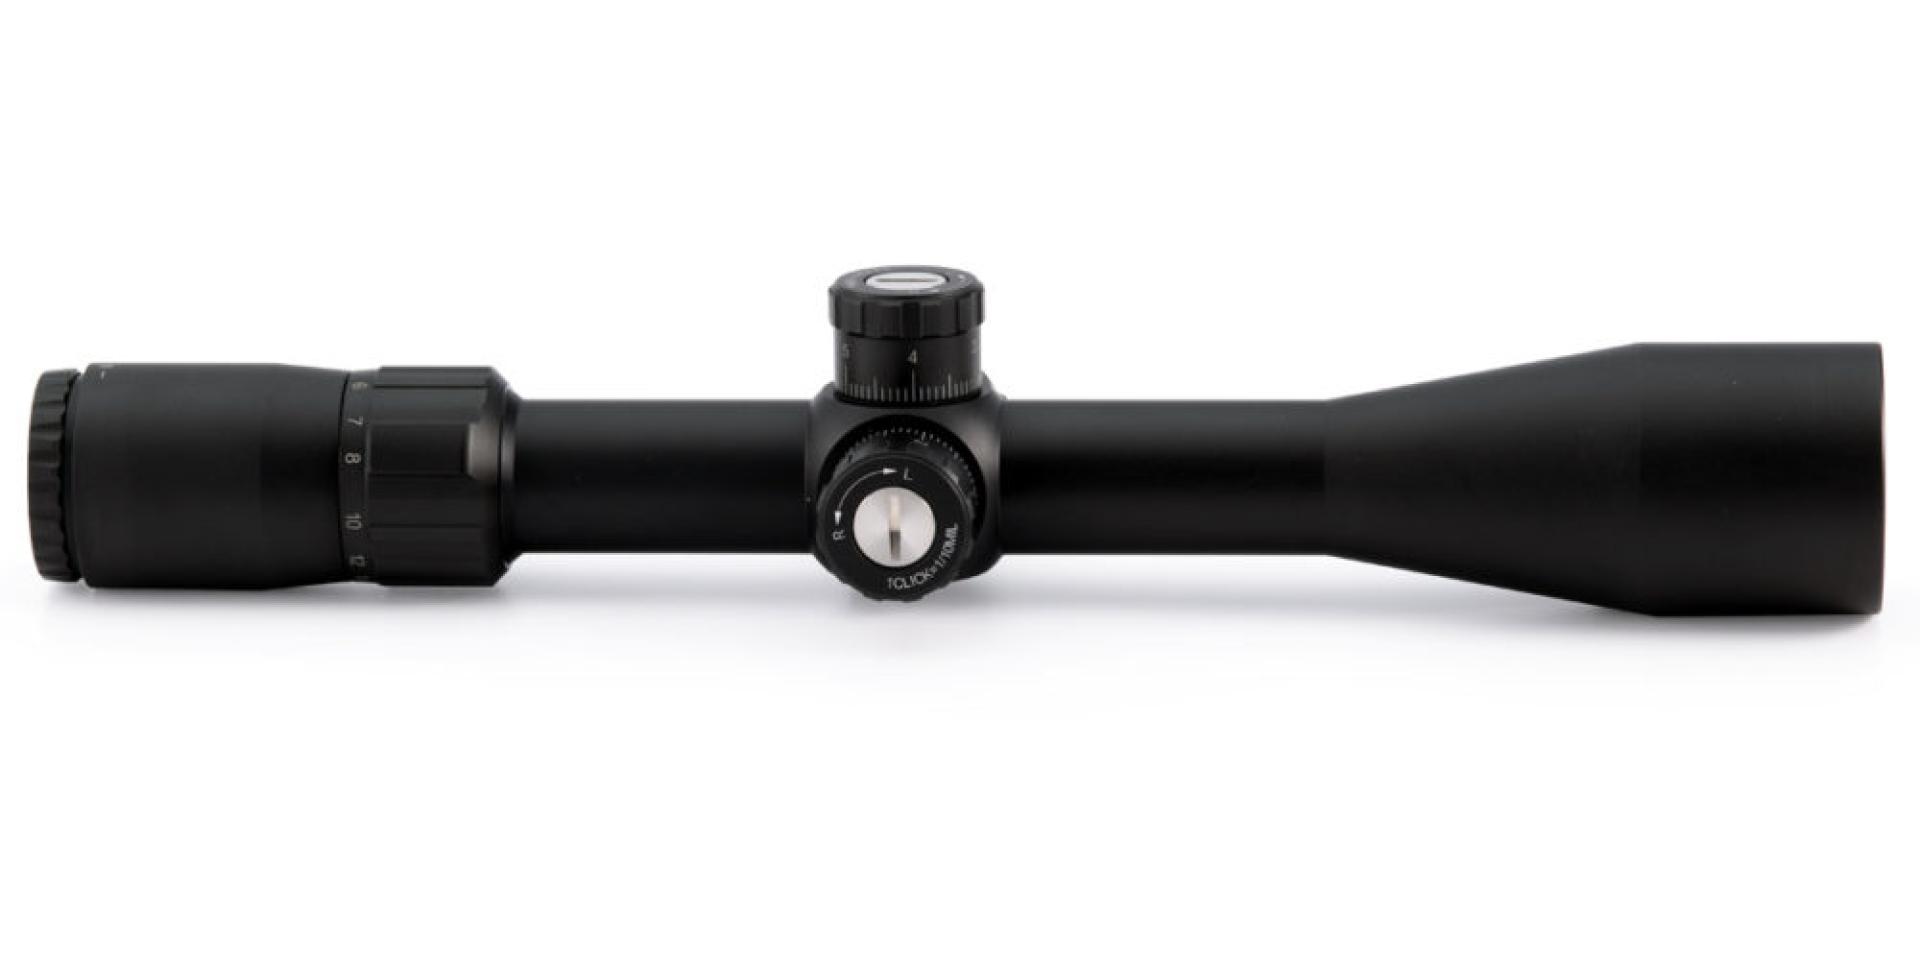 SHEPHERD BRS SERIES BRS-1 4-16X44 LIGHTED RETICLE SCOPE